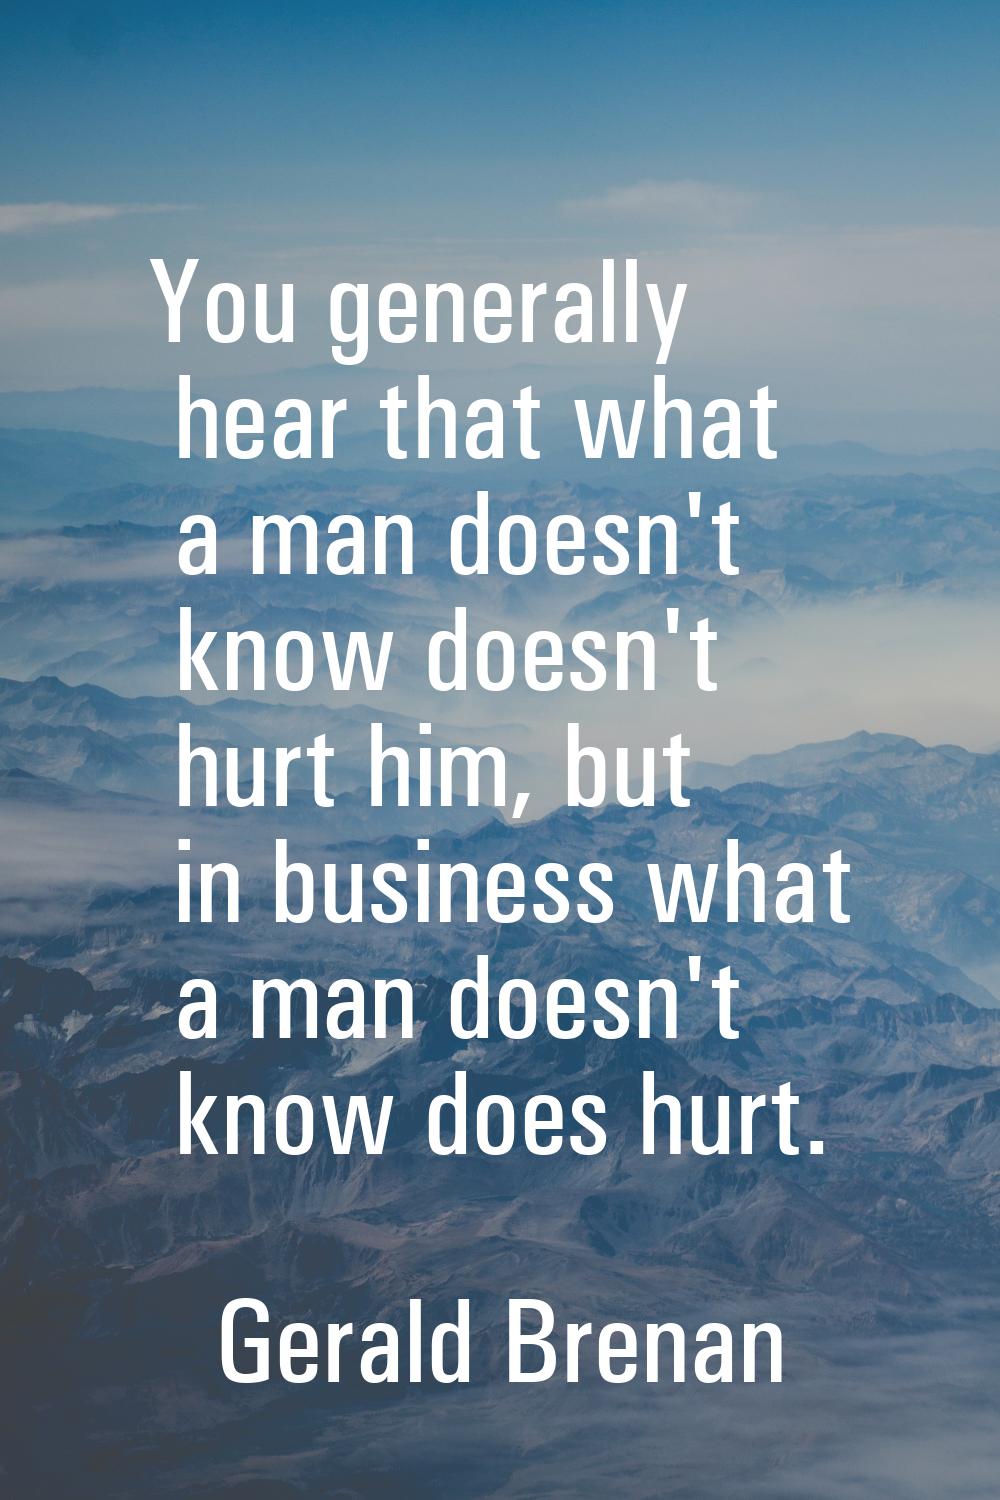 You generally hear that what a man doesn't know doesn't hurt him, but in business what a man doesn'